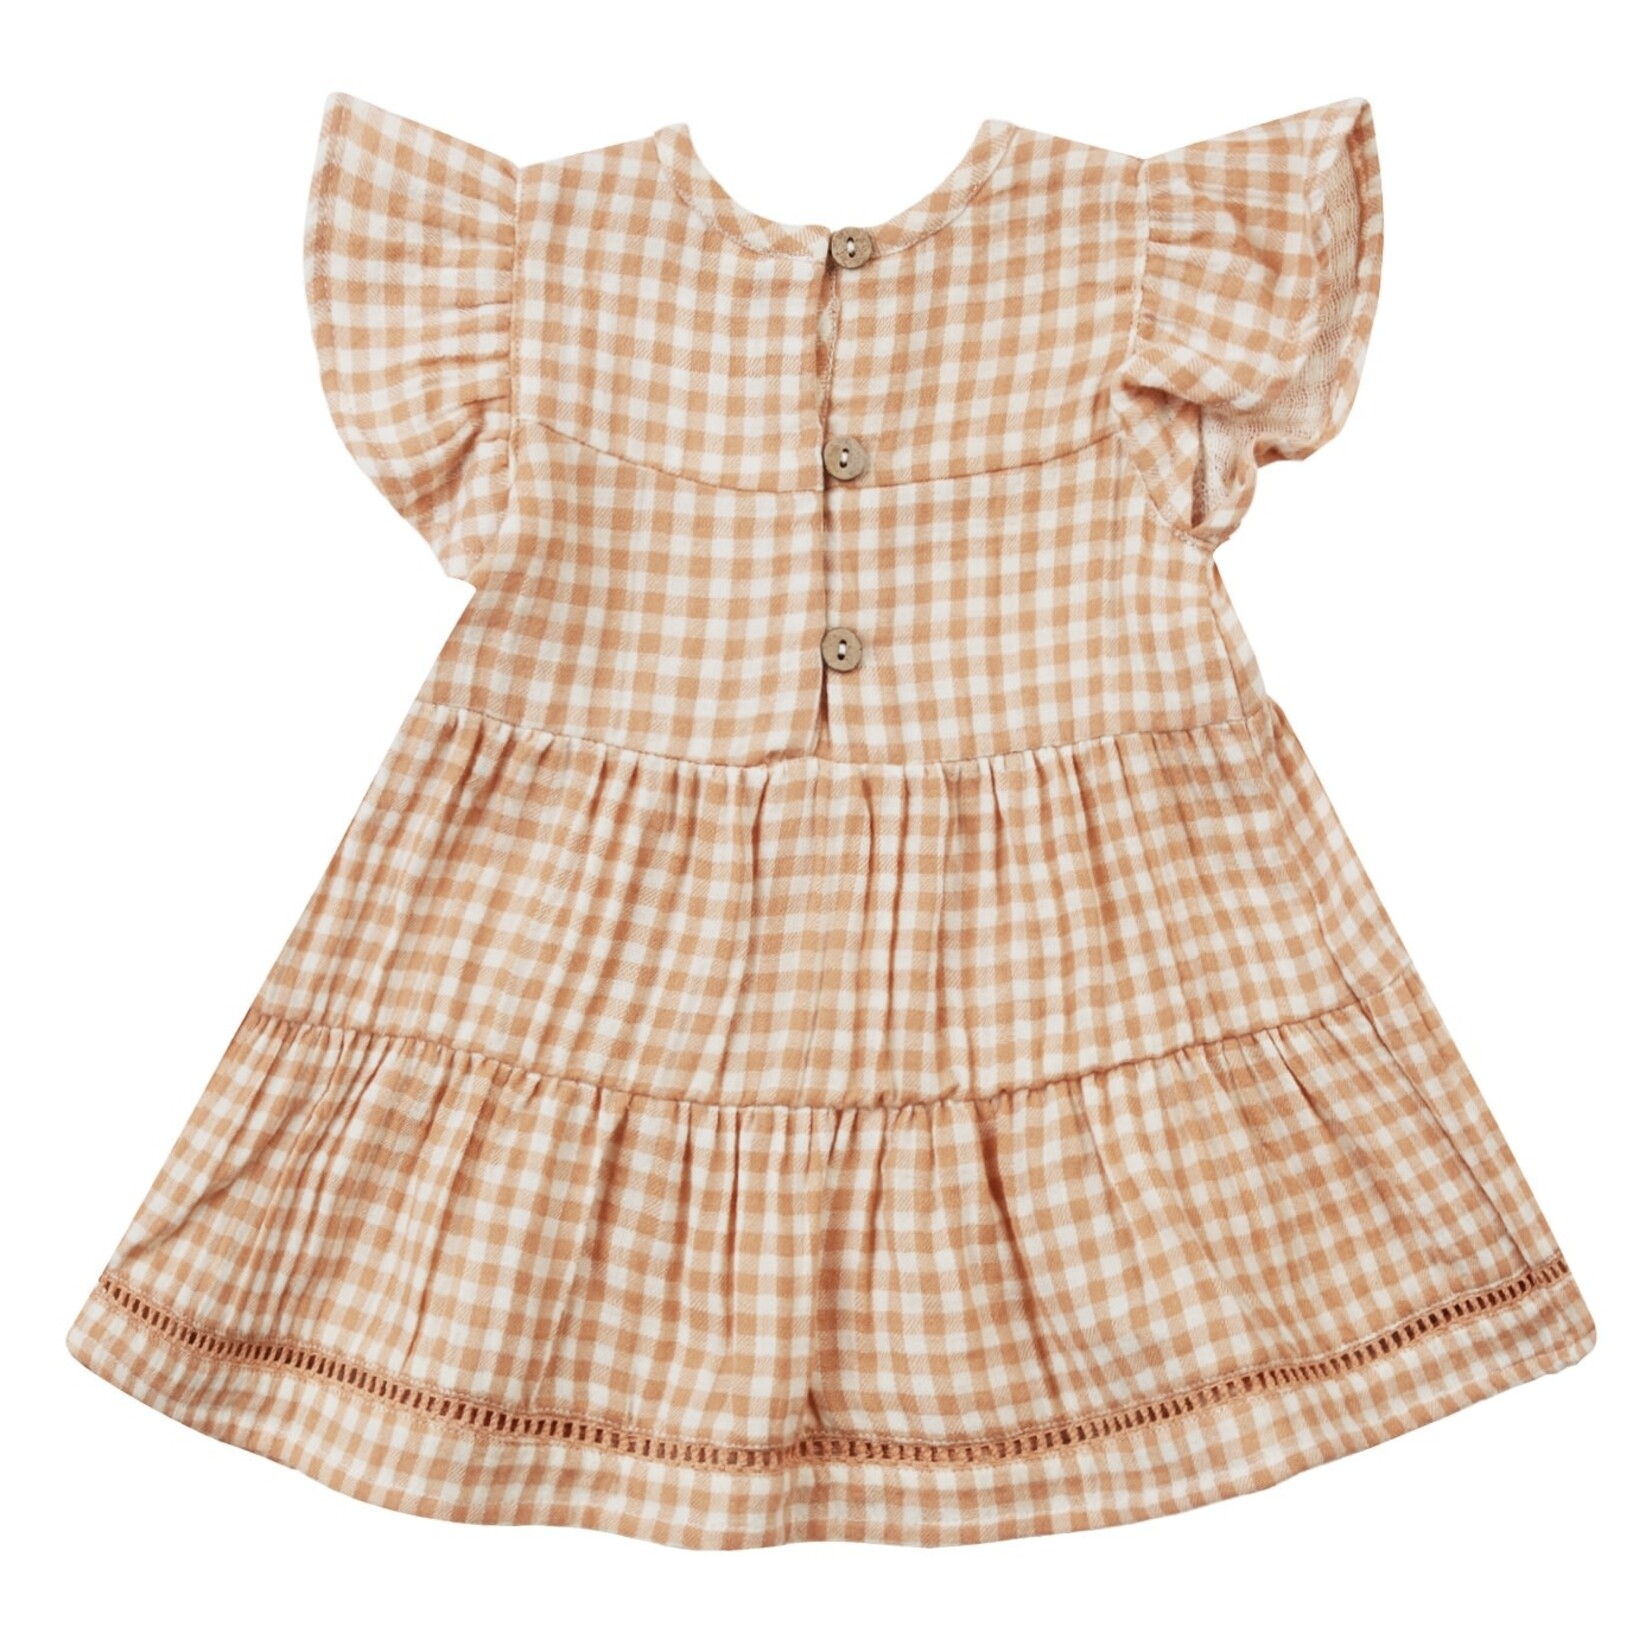 Quincy Mae Quincy Mae - Lily Gingham Dress